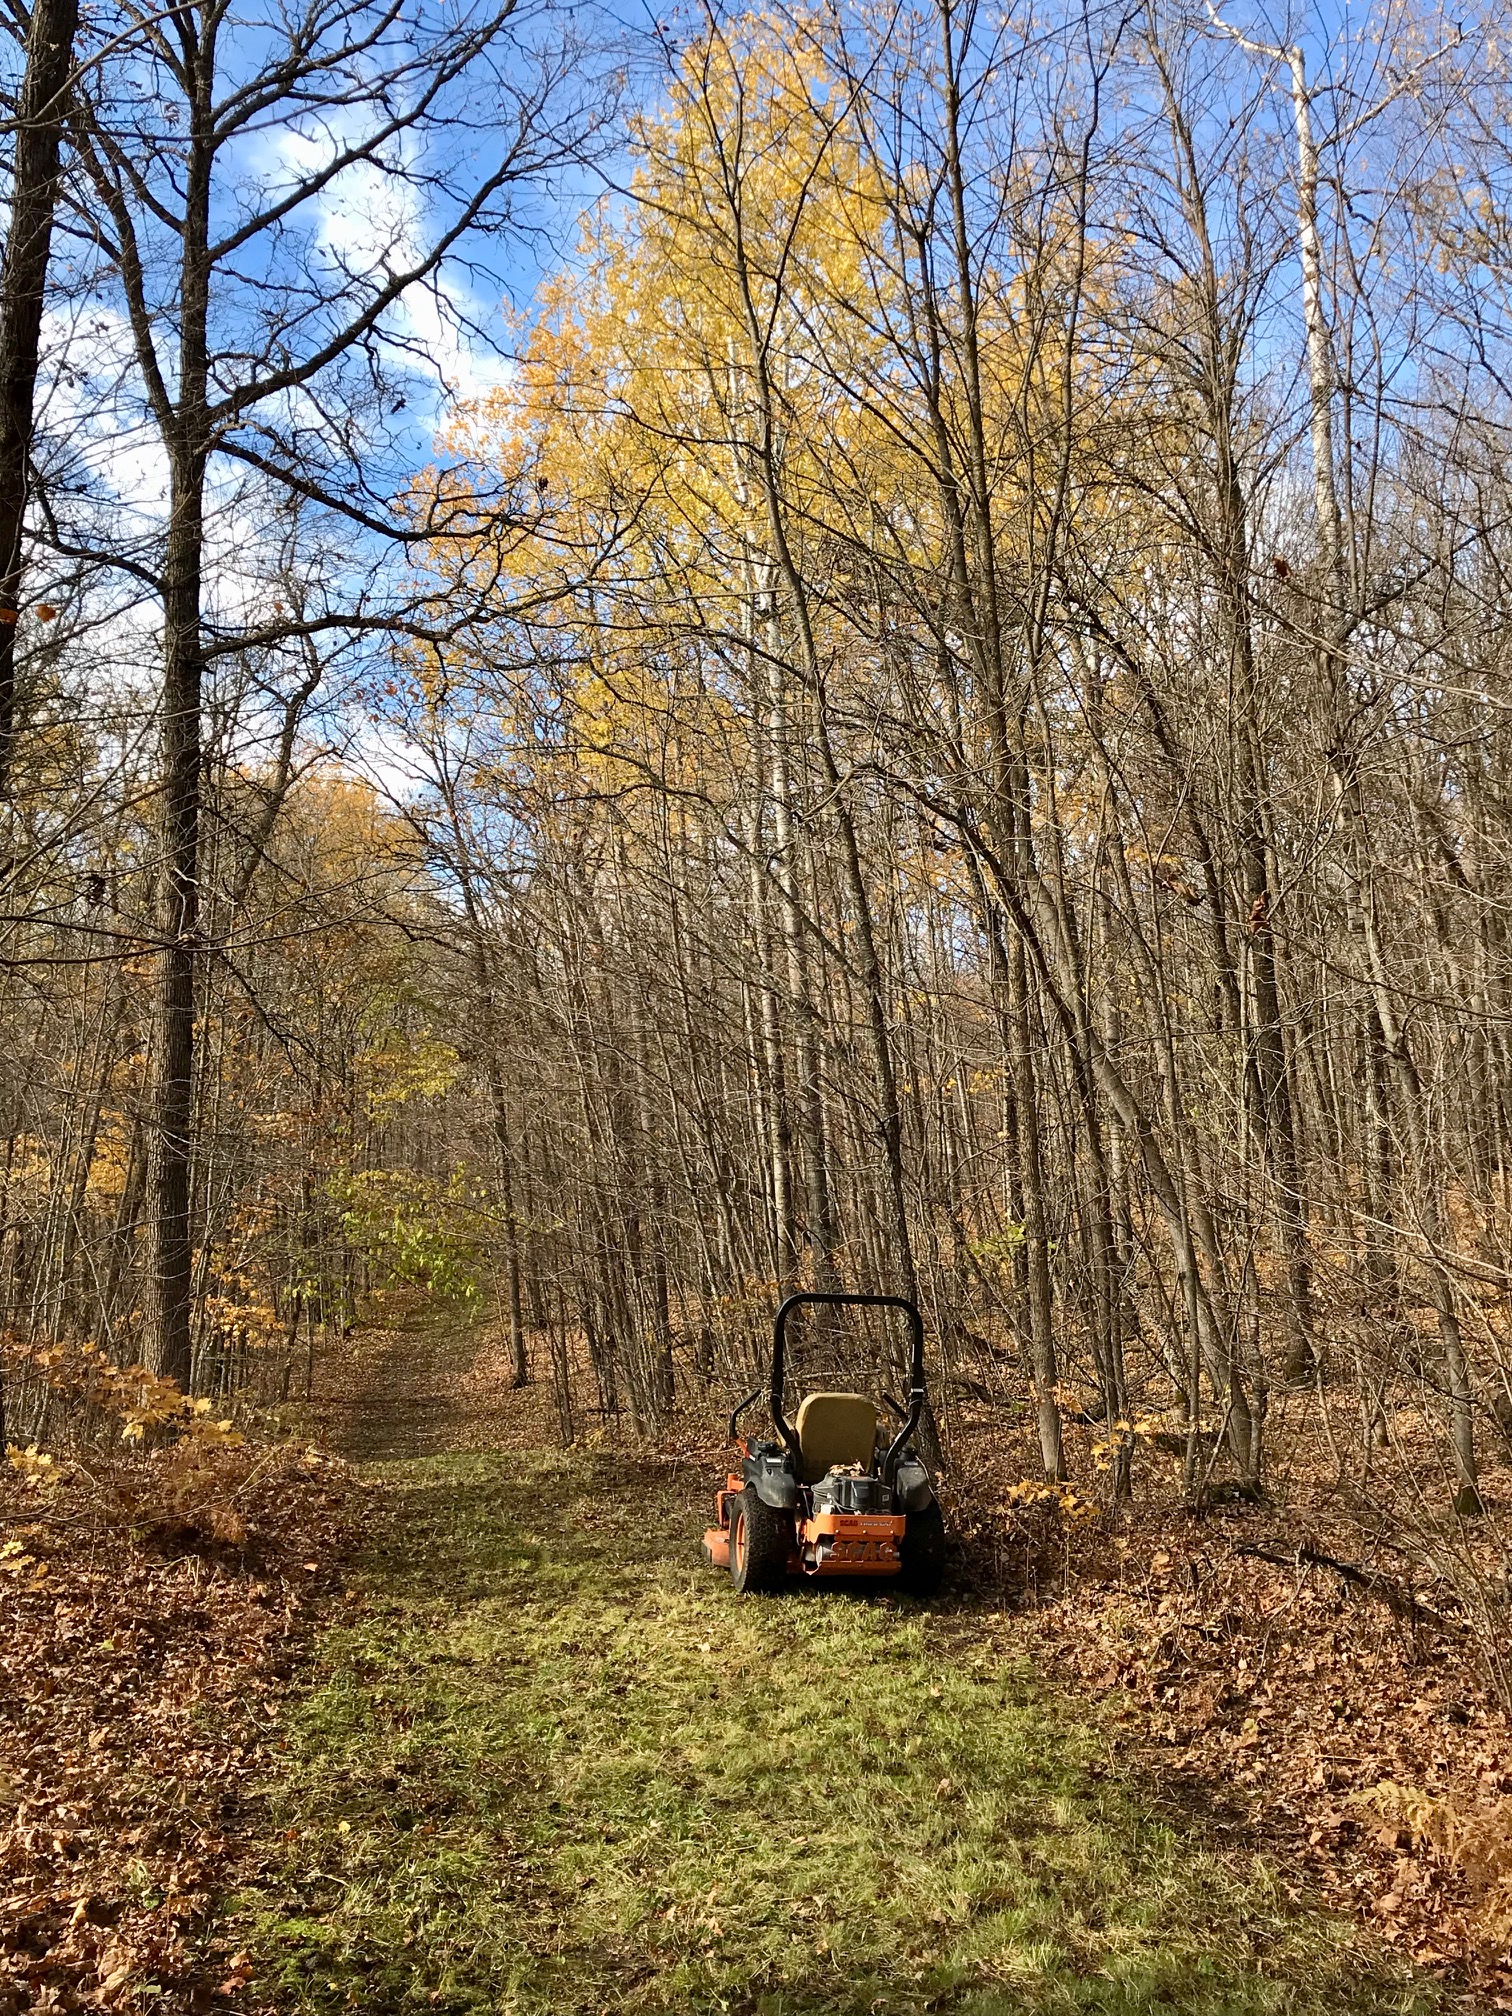 Fall grooming on North Loup, October 17th, 2017.